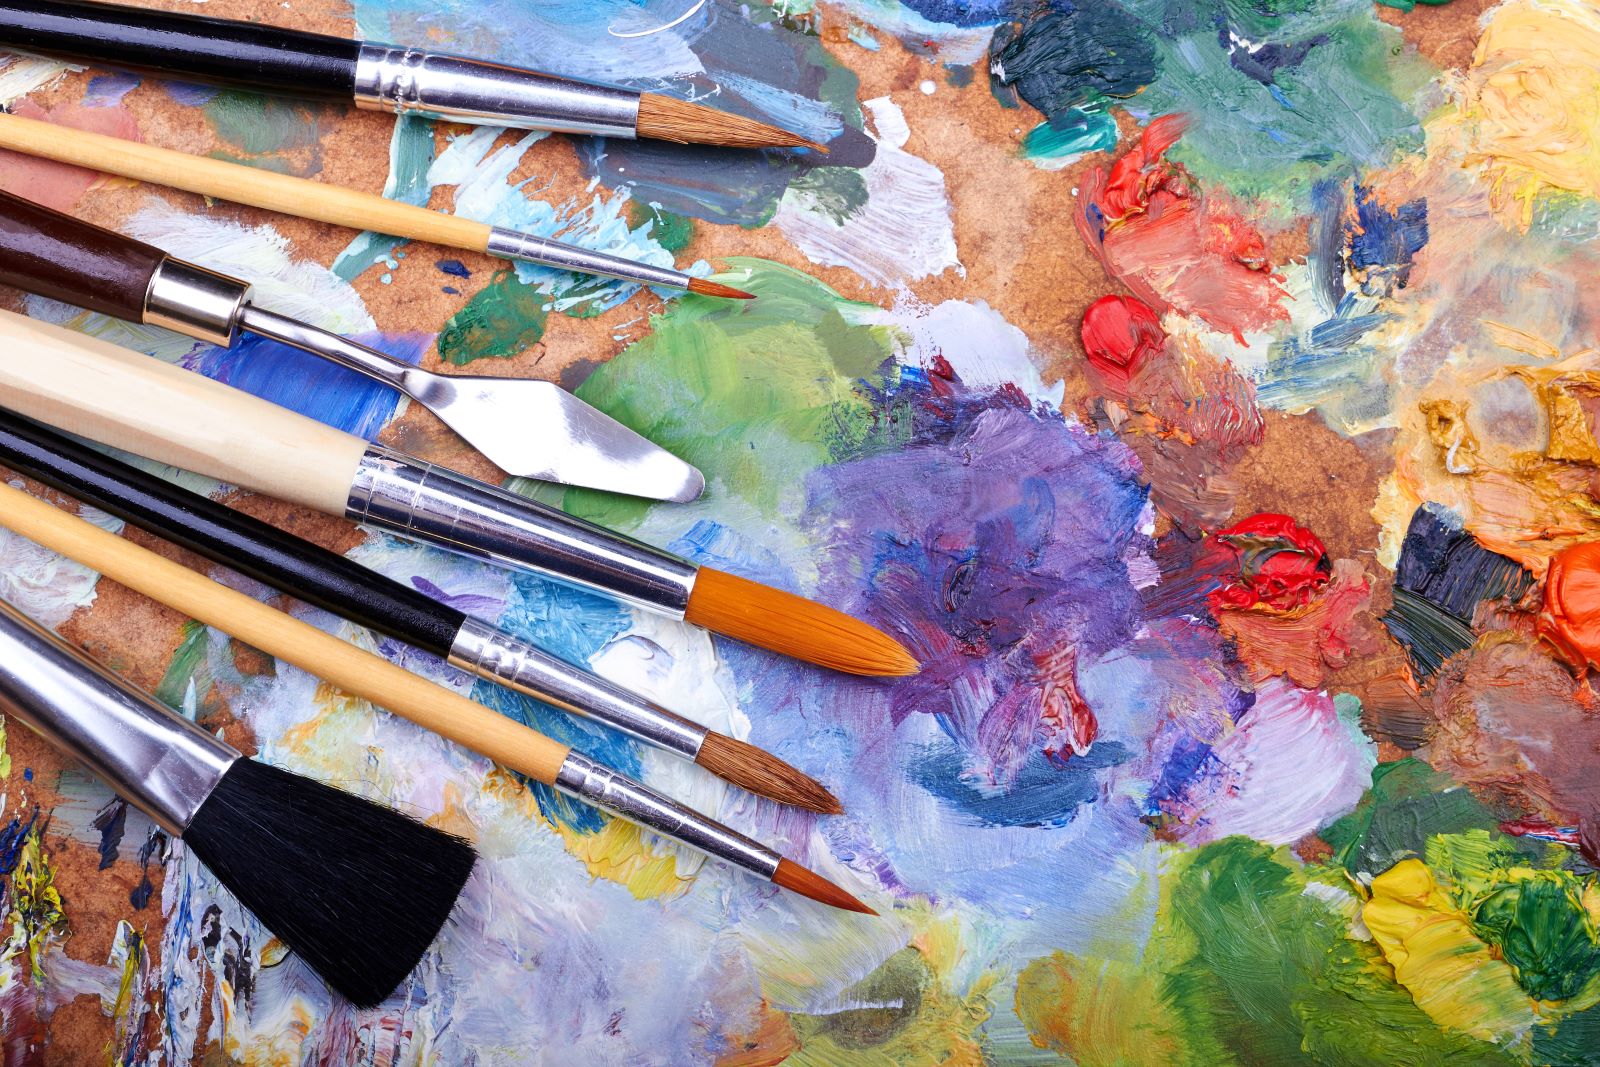 photo of art brushes and paint strokes